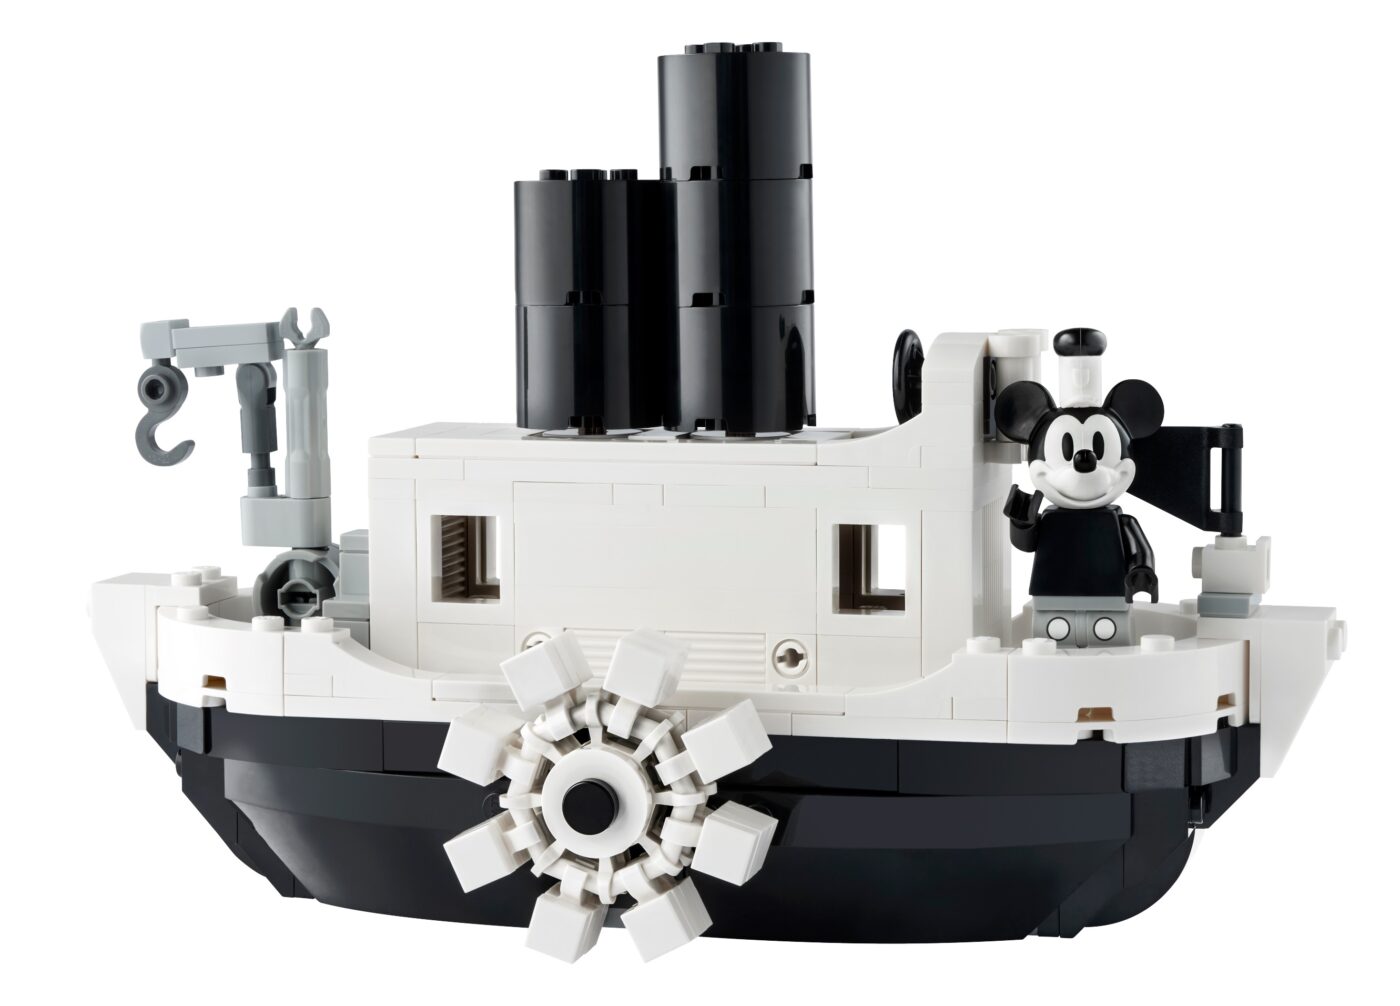 LEGO 40659 Mini Steamboat Willie GWP revealed to have mechanical functions!3